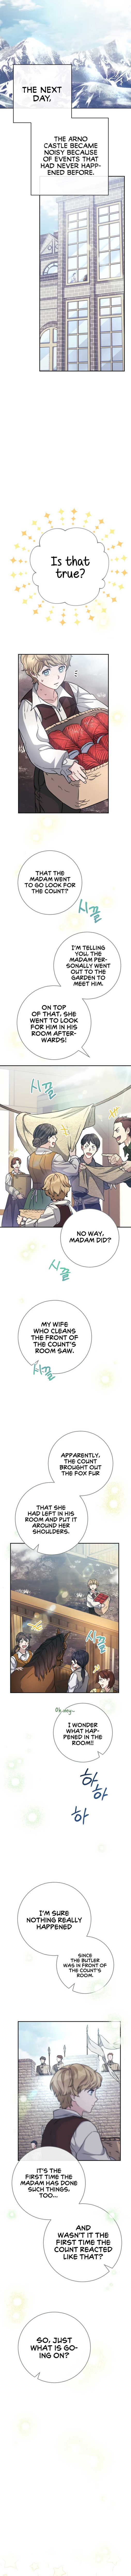 Marriage of Convenience chapter 4